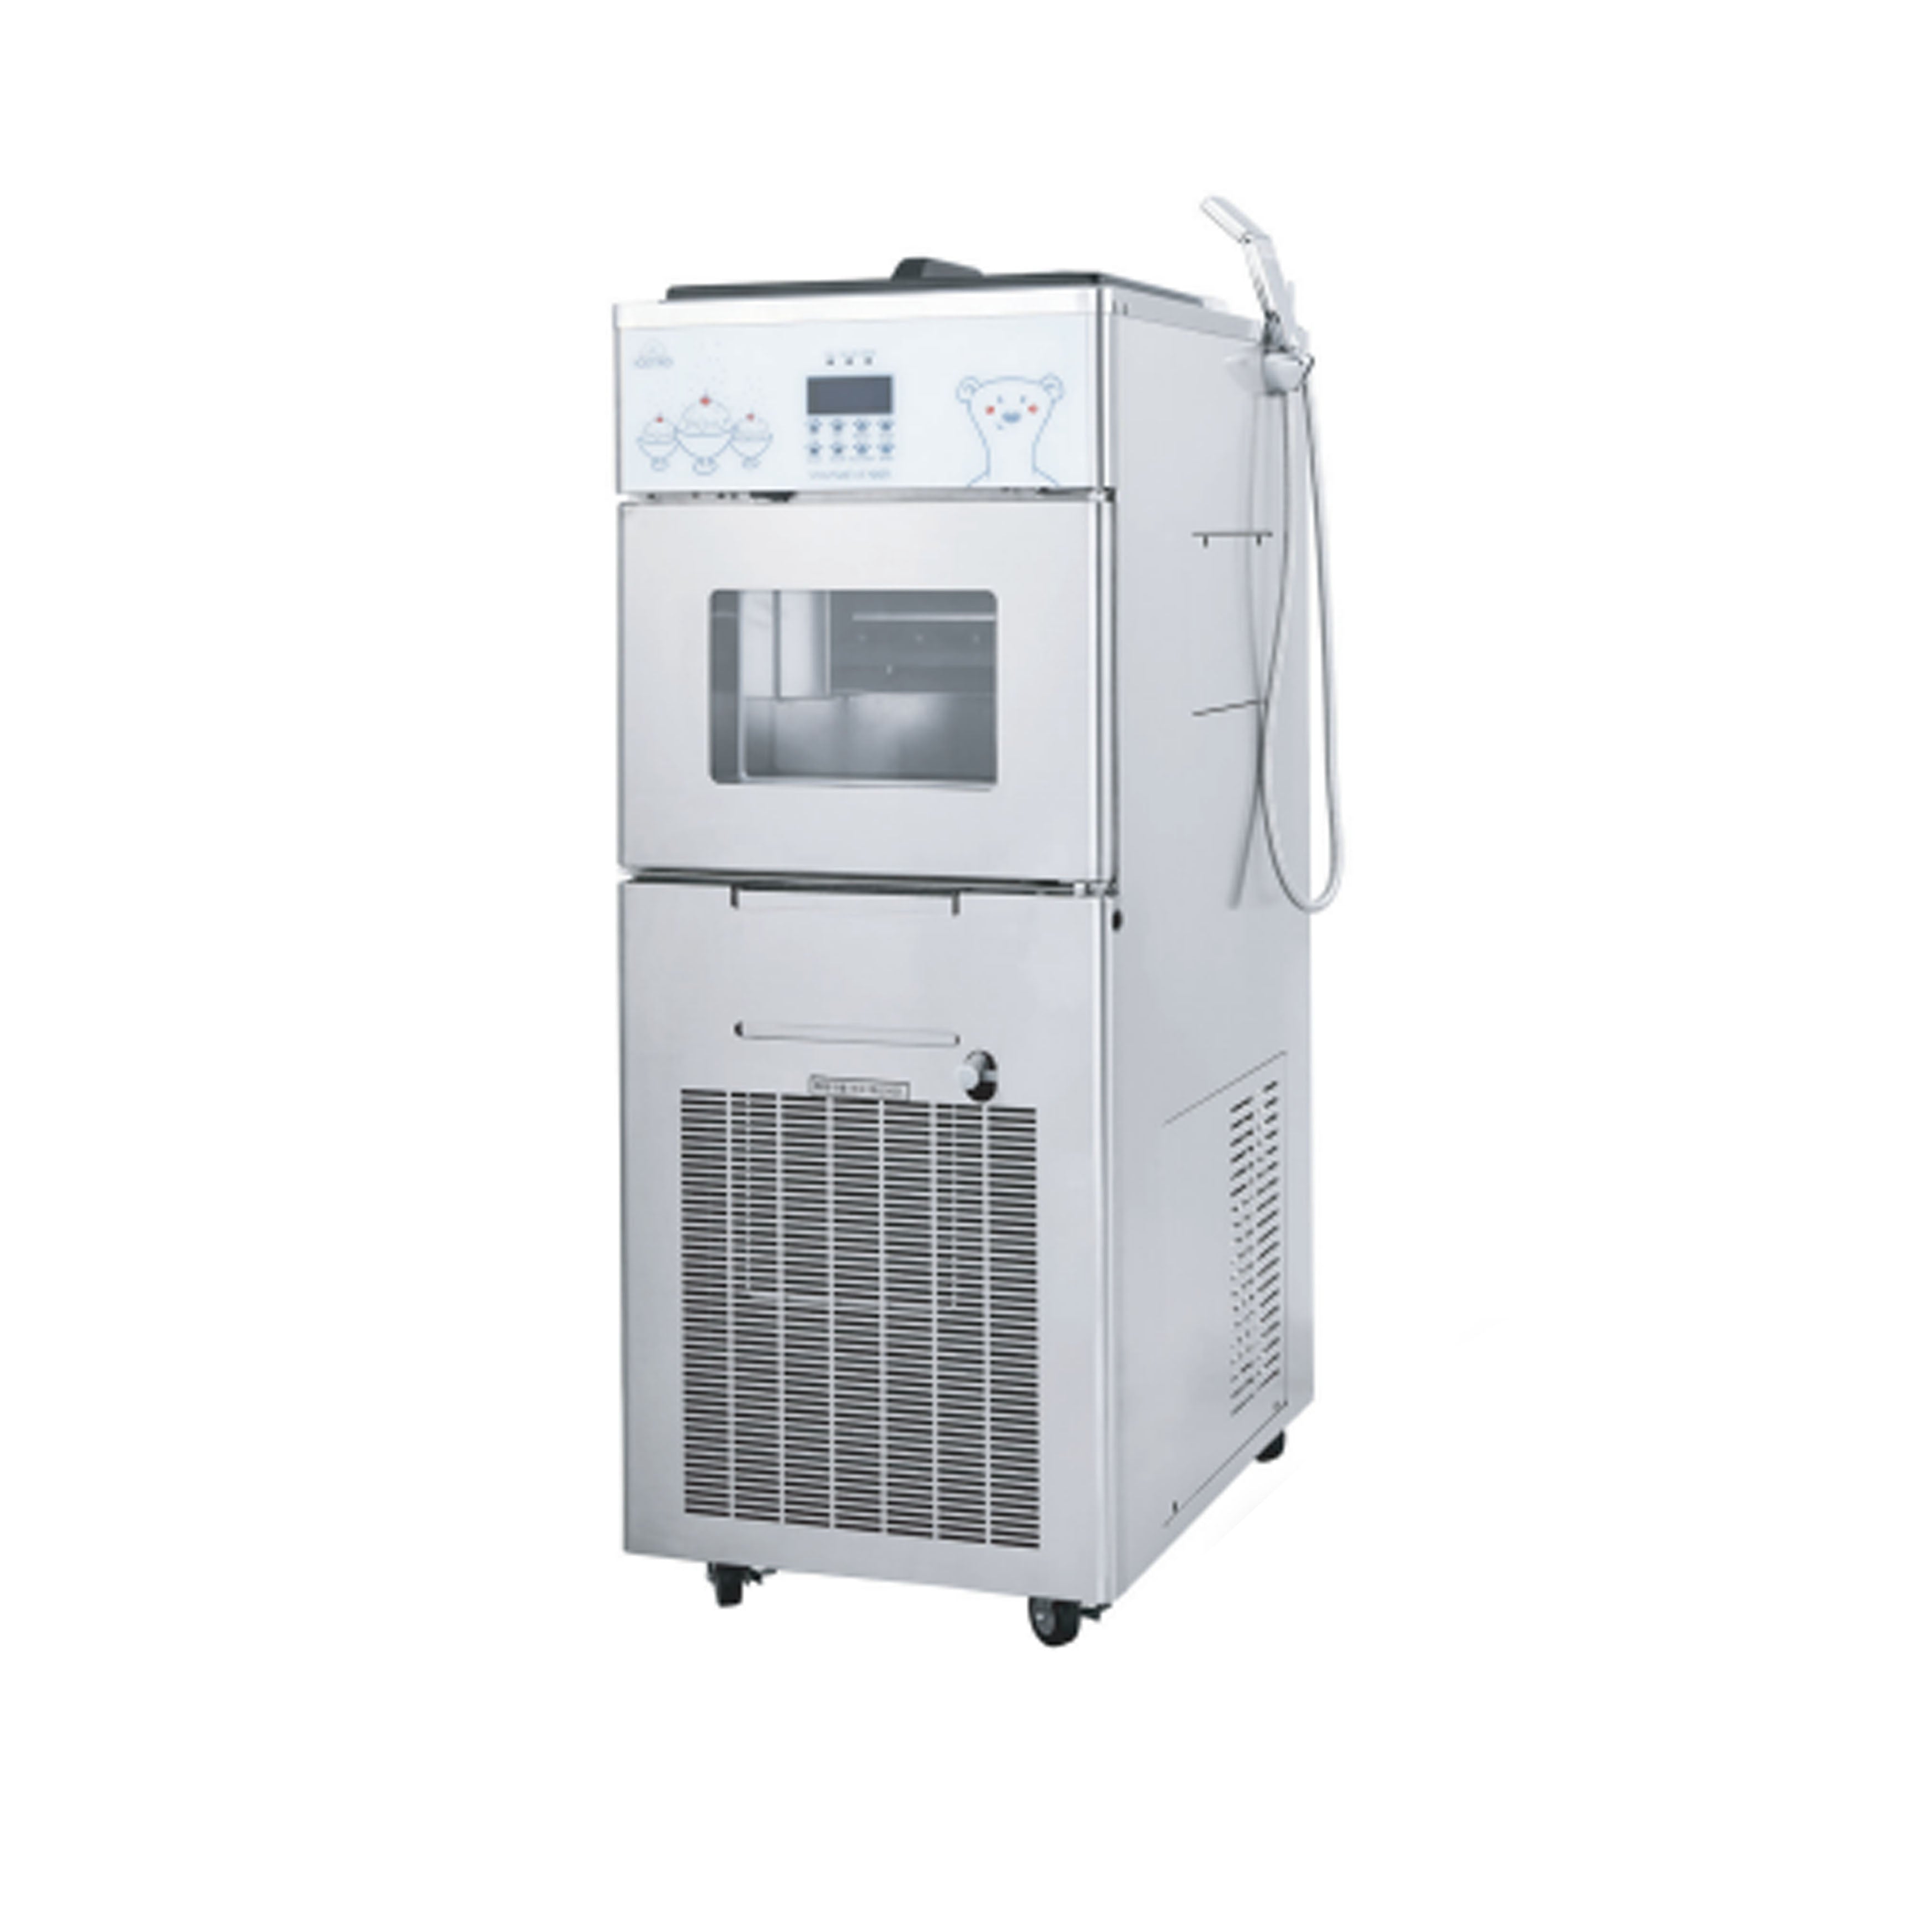 Icetro - IS-0700-AS, Commercial 21 Air Cooled Ice Machine Snow Flake